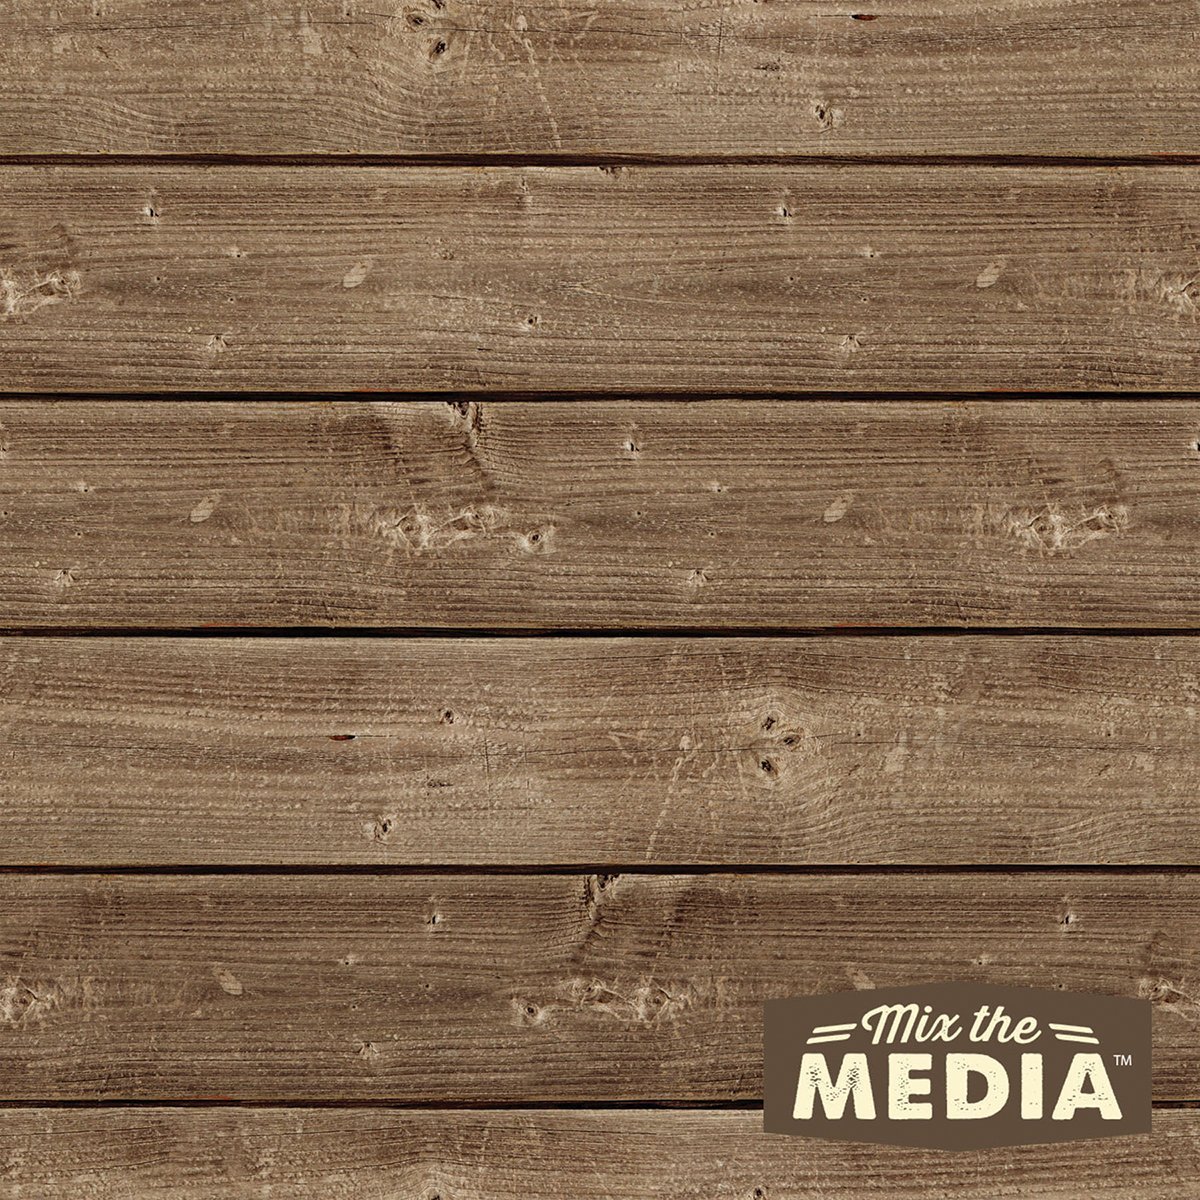 Jb0431 10 X 10 In. Mix The Media Wooden Plank Plaque